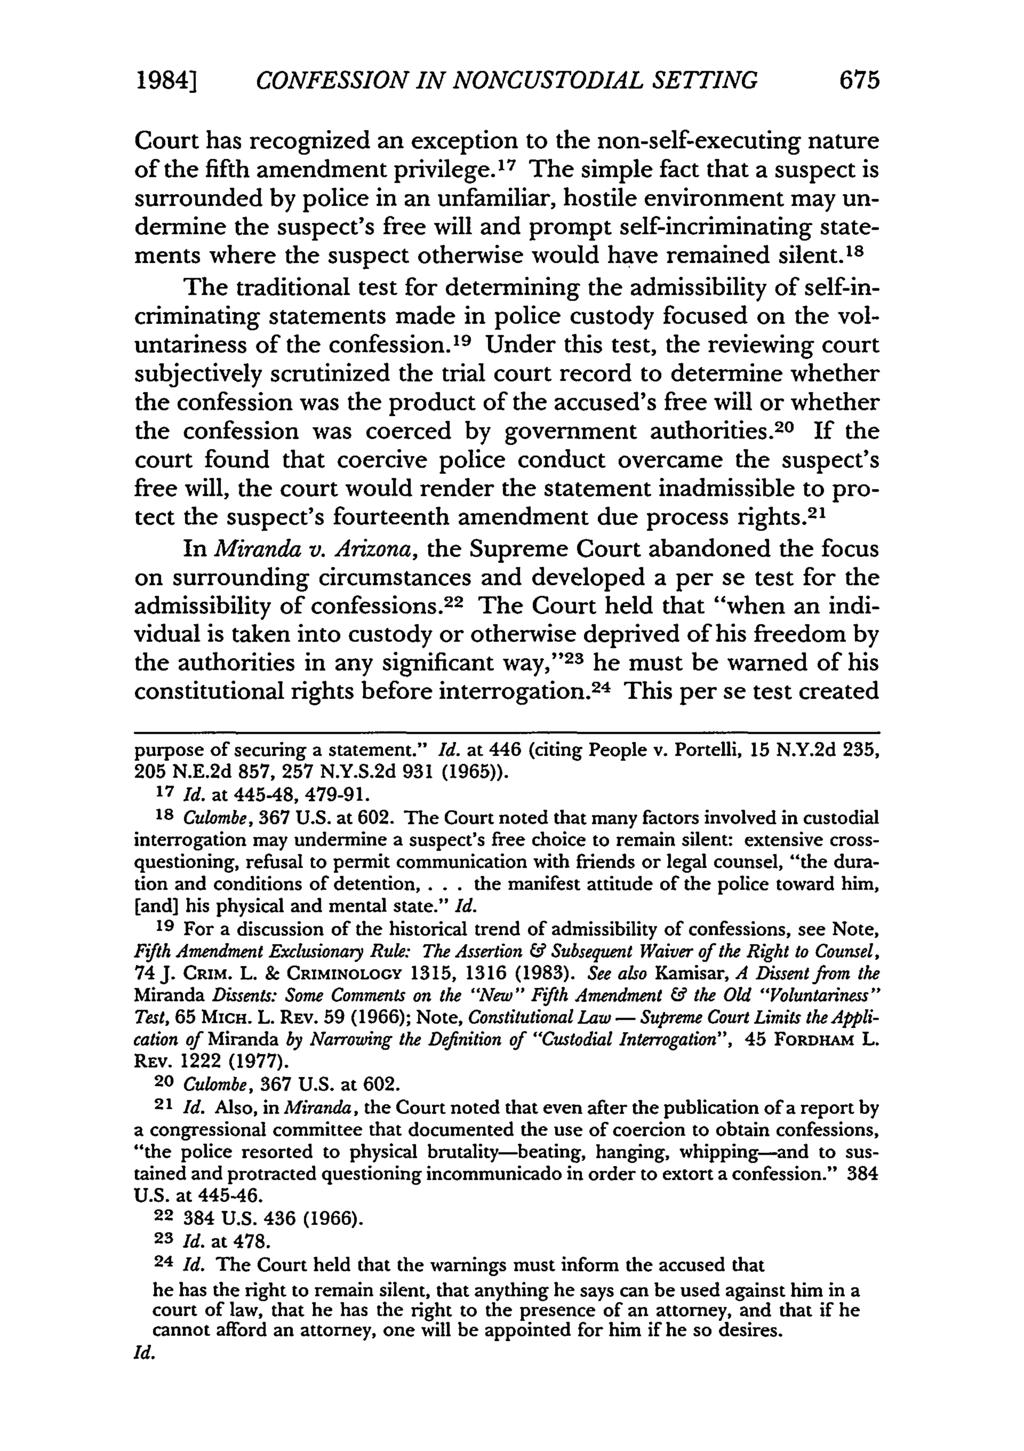 19841 CONFESSION IN NONCUSTODIAL SETTING 675 Court has recognized an exception to the non-self-executing nature of the fifth amendment privilege.